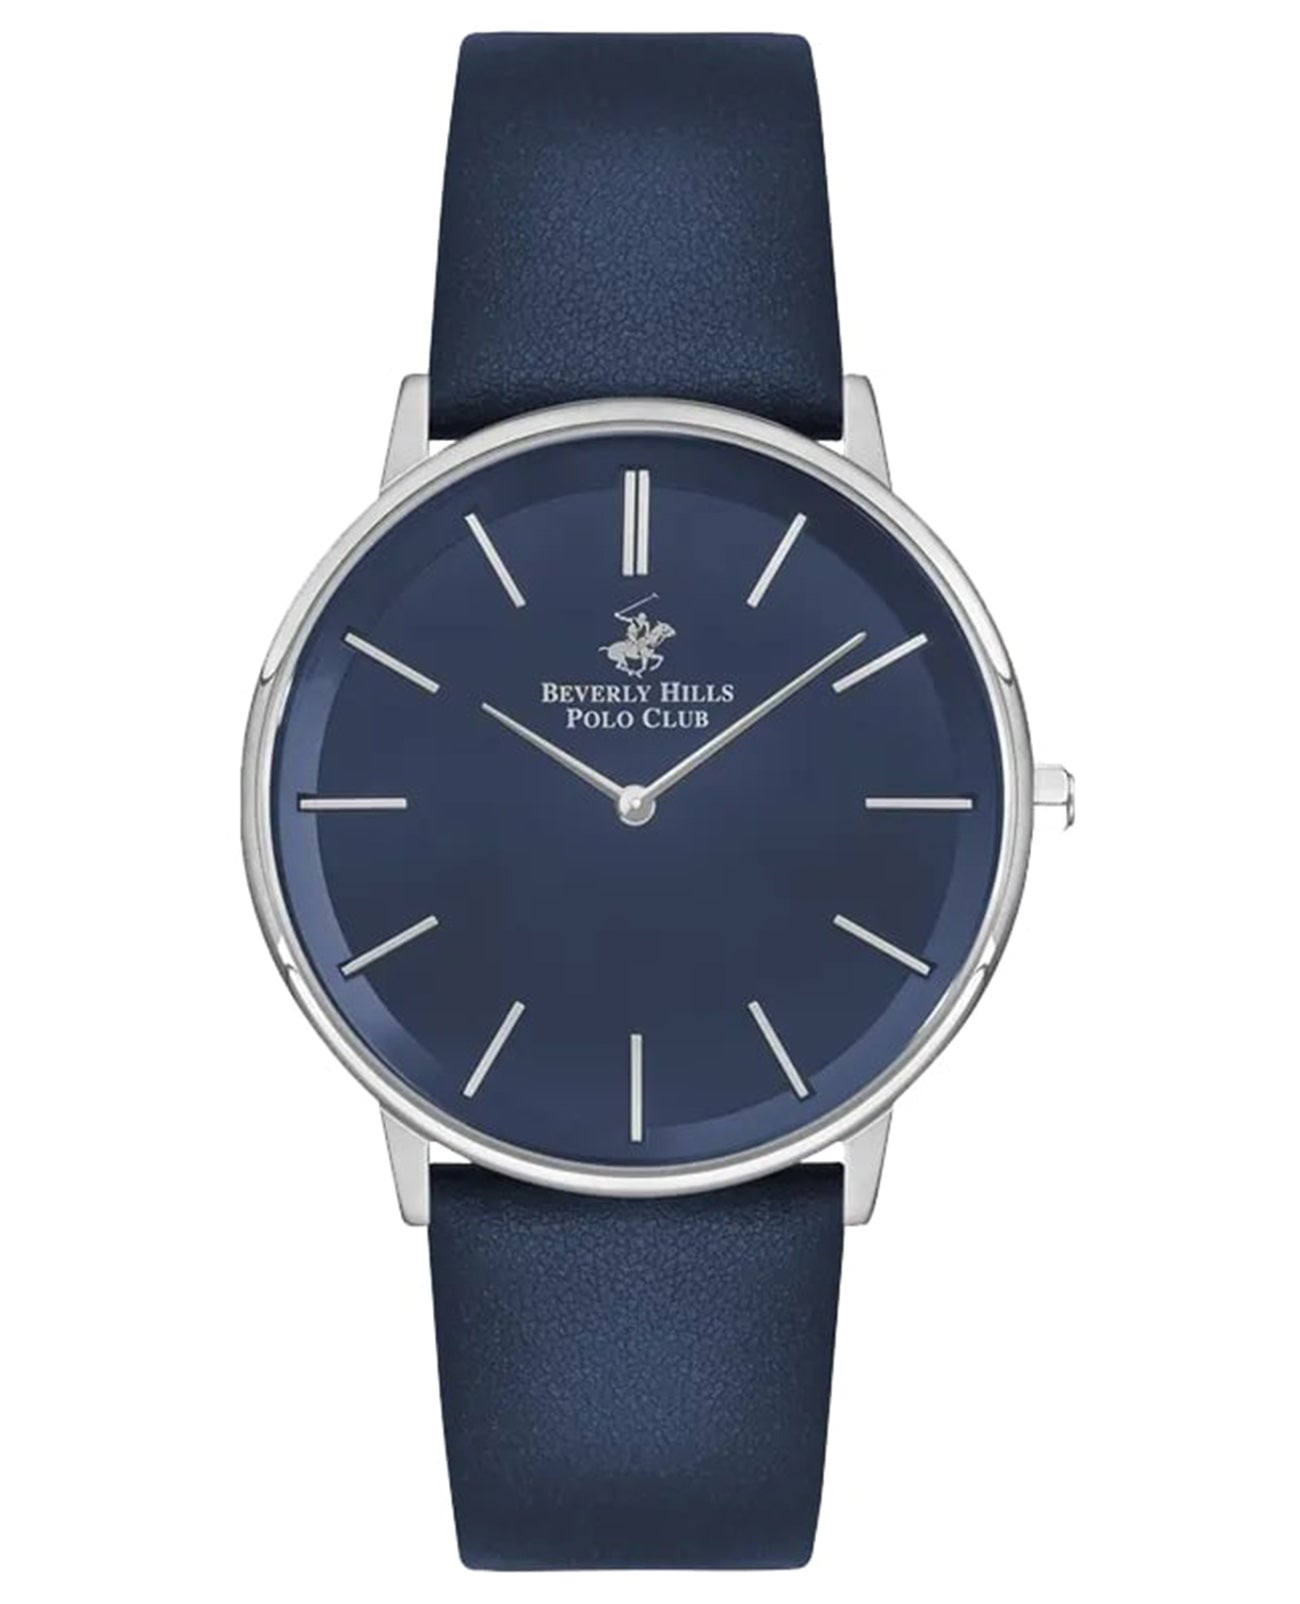 Beverly Hills Polo Club  Men's Watch